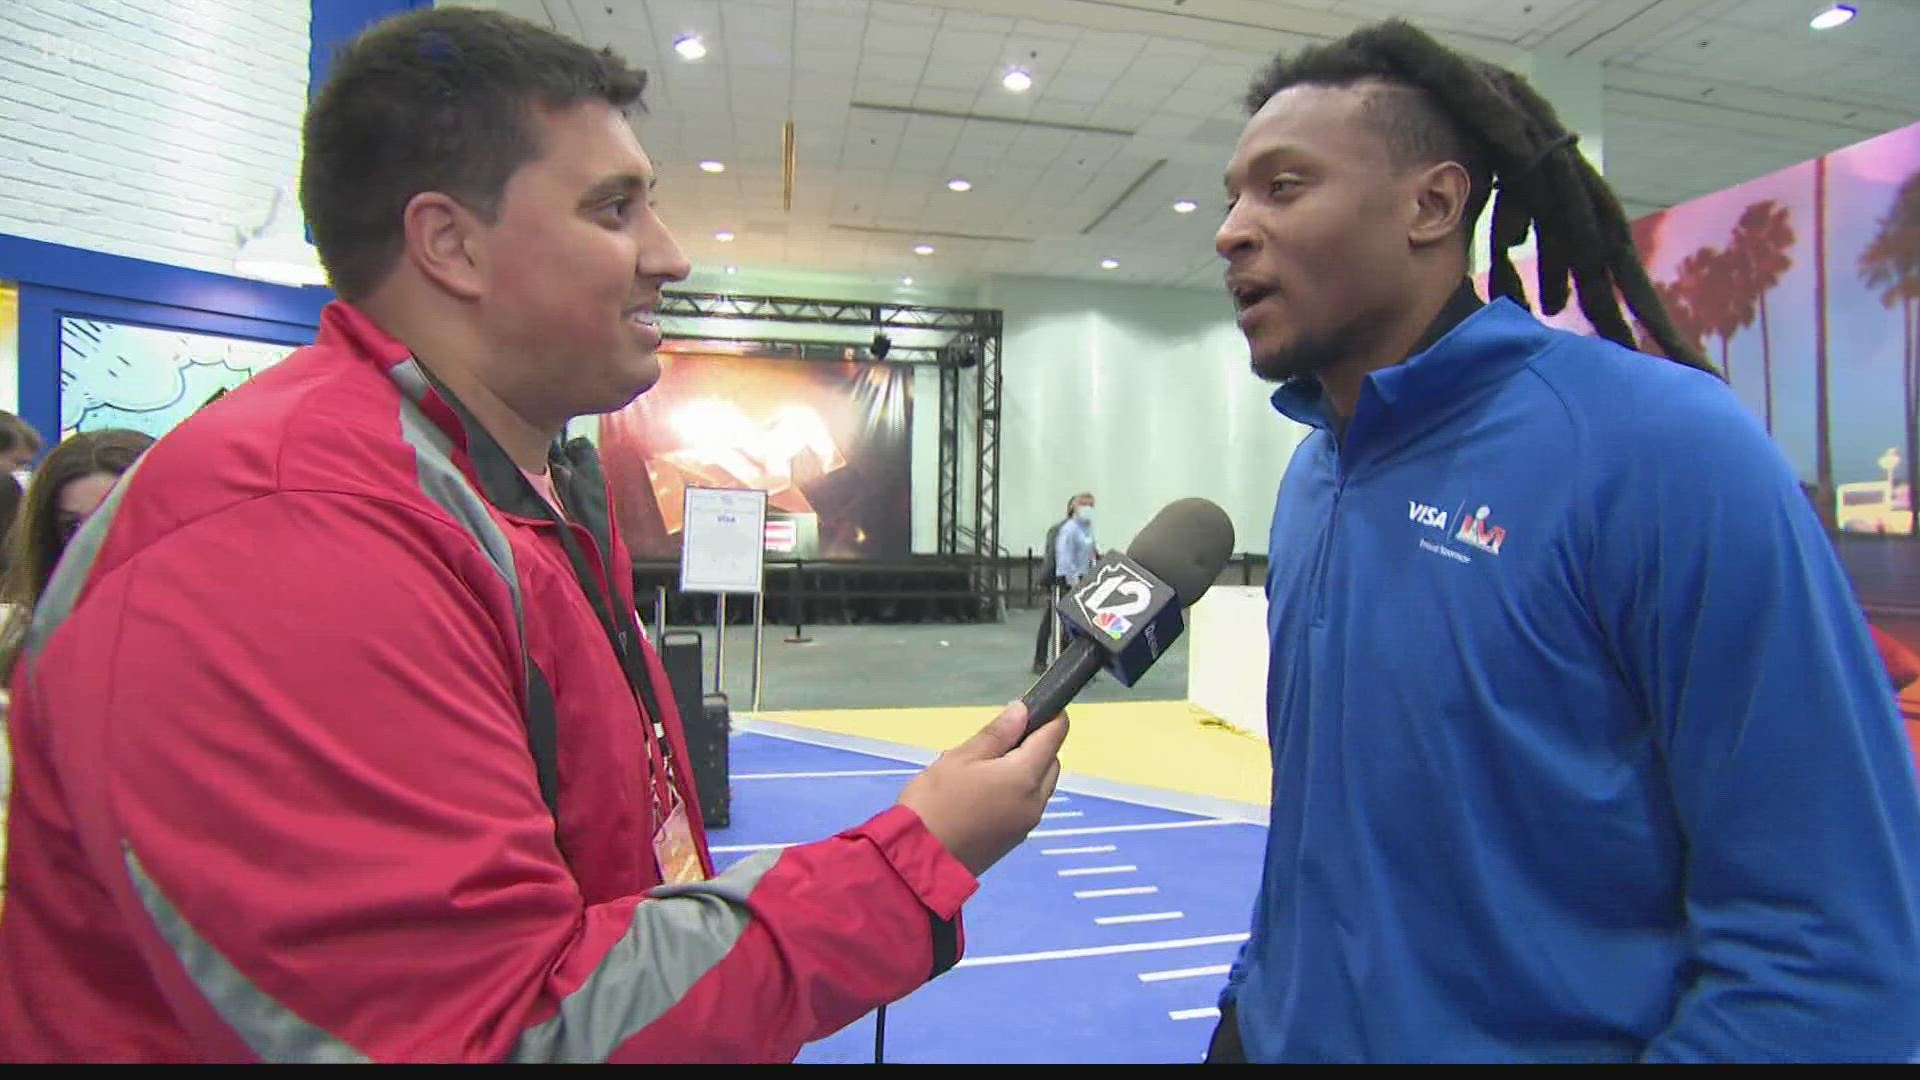 It's all about the Super Bowl in LA this weekend. The Cardinals may not have made it, but wide receiver DeAndre Hopkins did and he spent some time with 12 News.